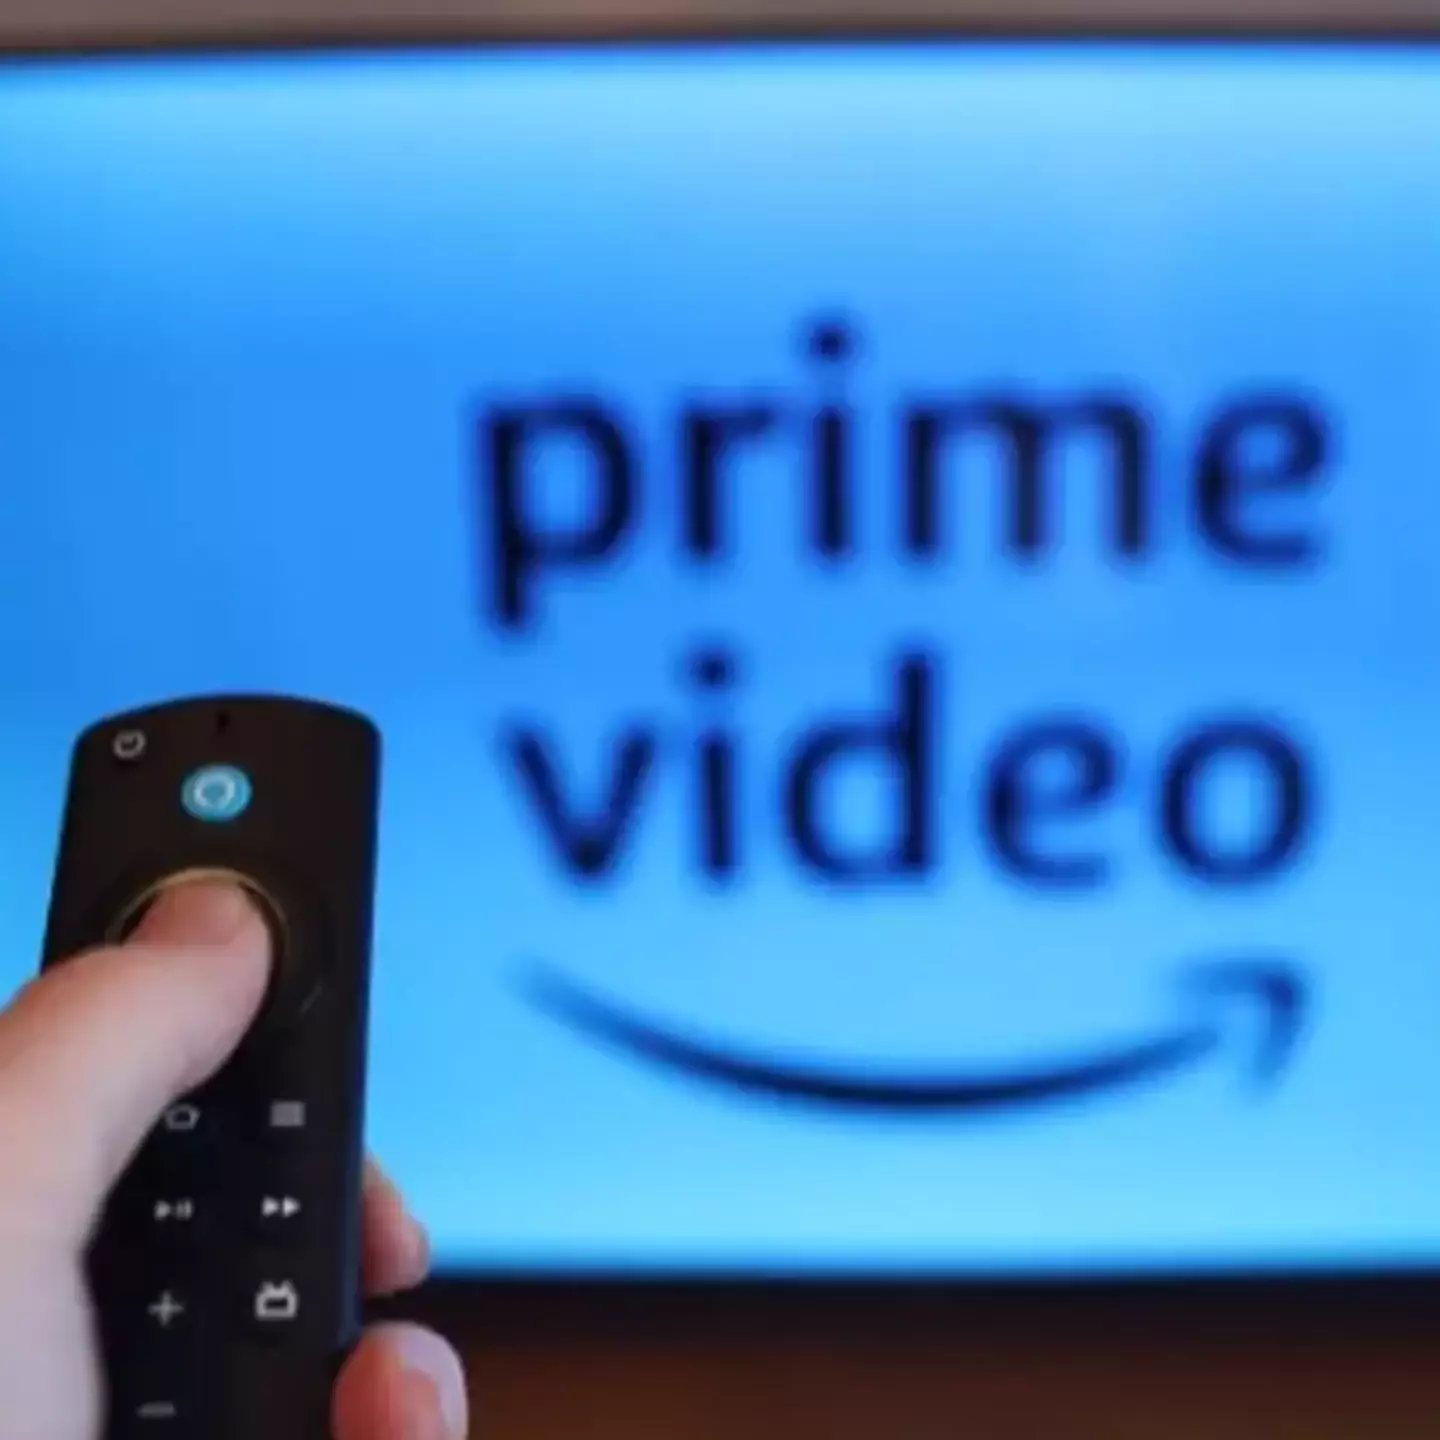 Amazon Prime is being sued after making major change to streaming service